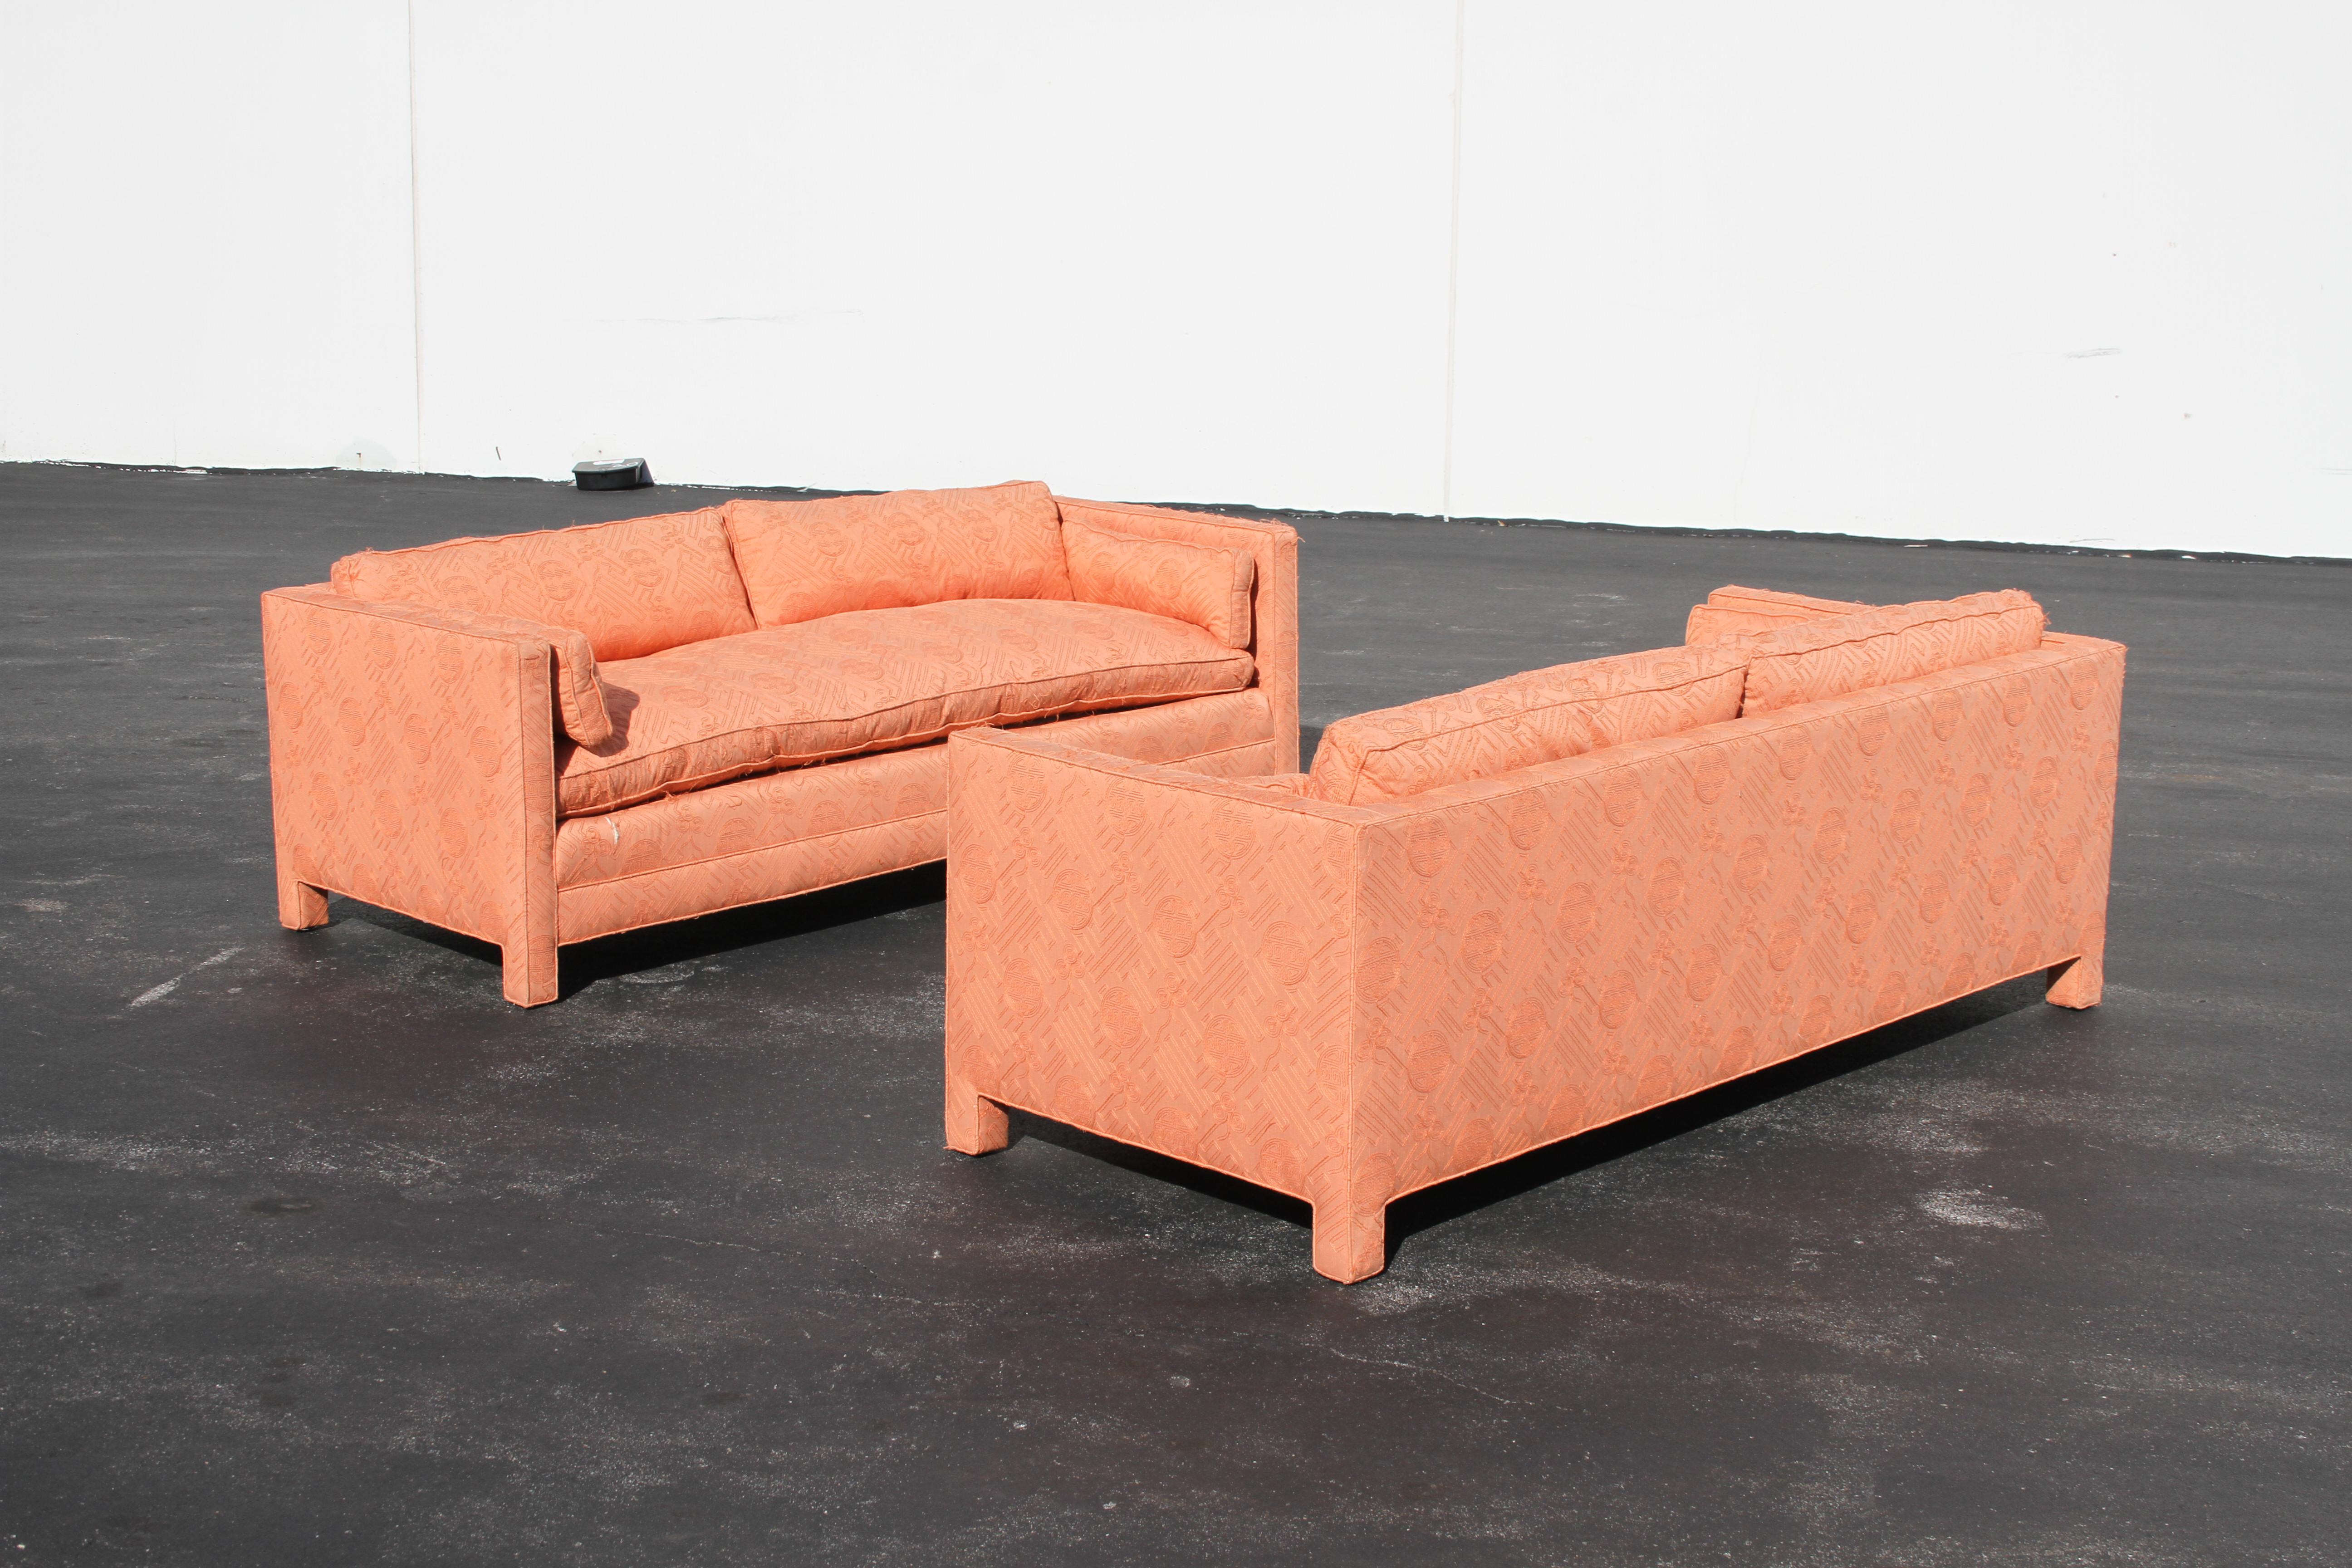 Pair of matching Hollywood Regency 1970s fully upholstered sofas with down seats, backs and arm cushions, designed by John Mascheroni for Swaim High point, North Carolina. Shown in original, Asian stitched pattern over silk. They must be